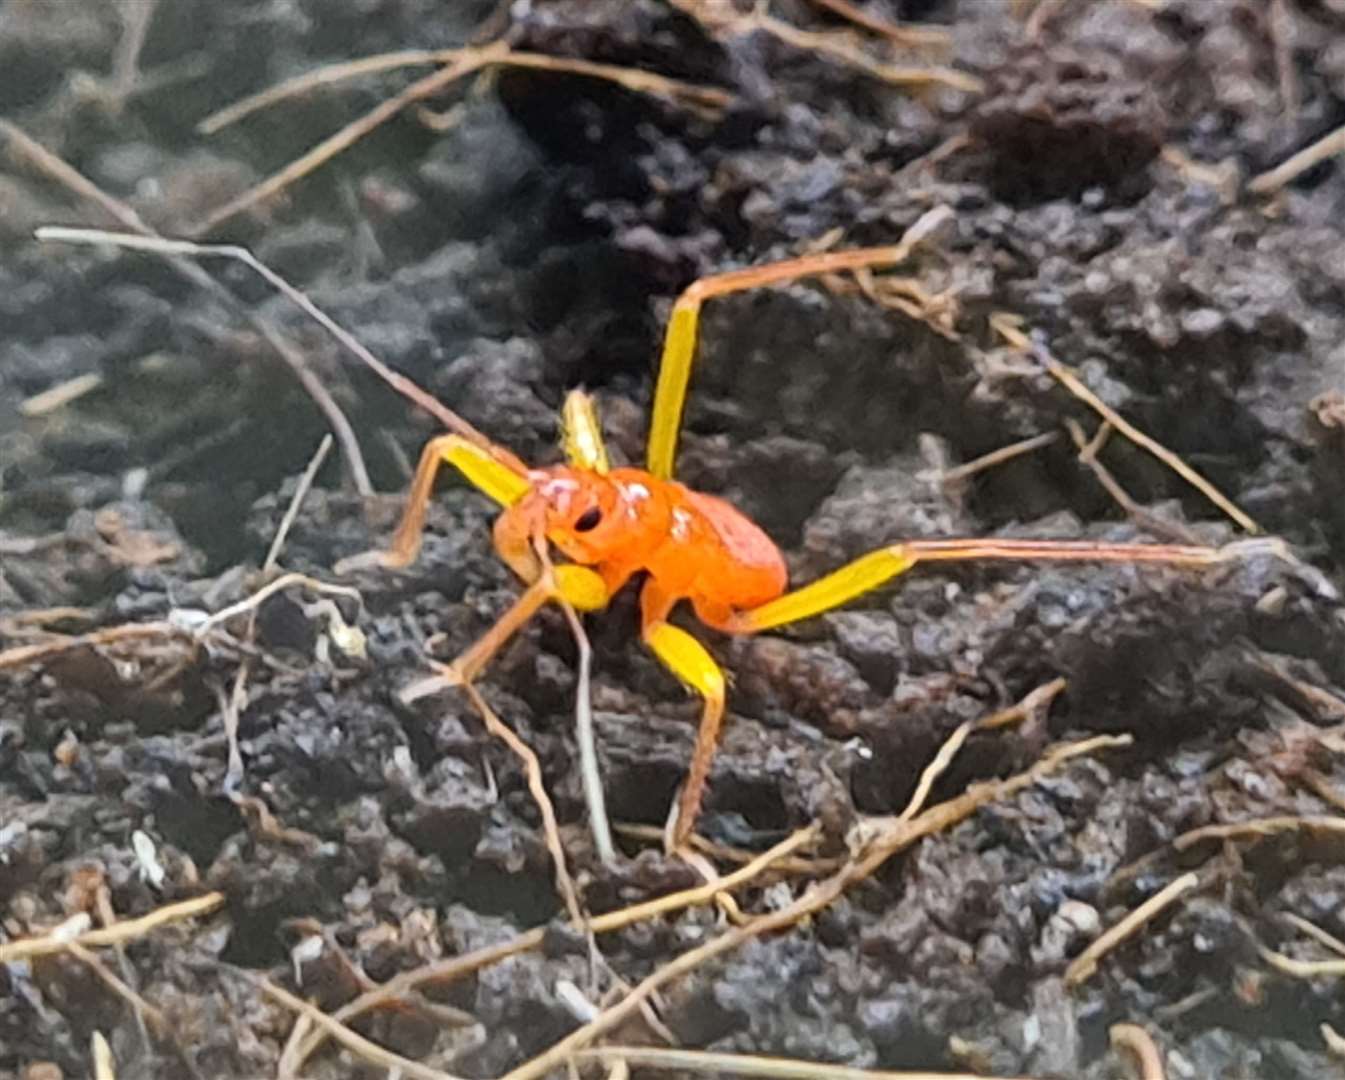 The Assassin Bug